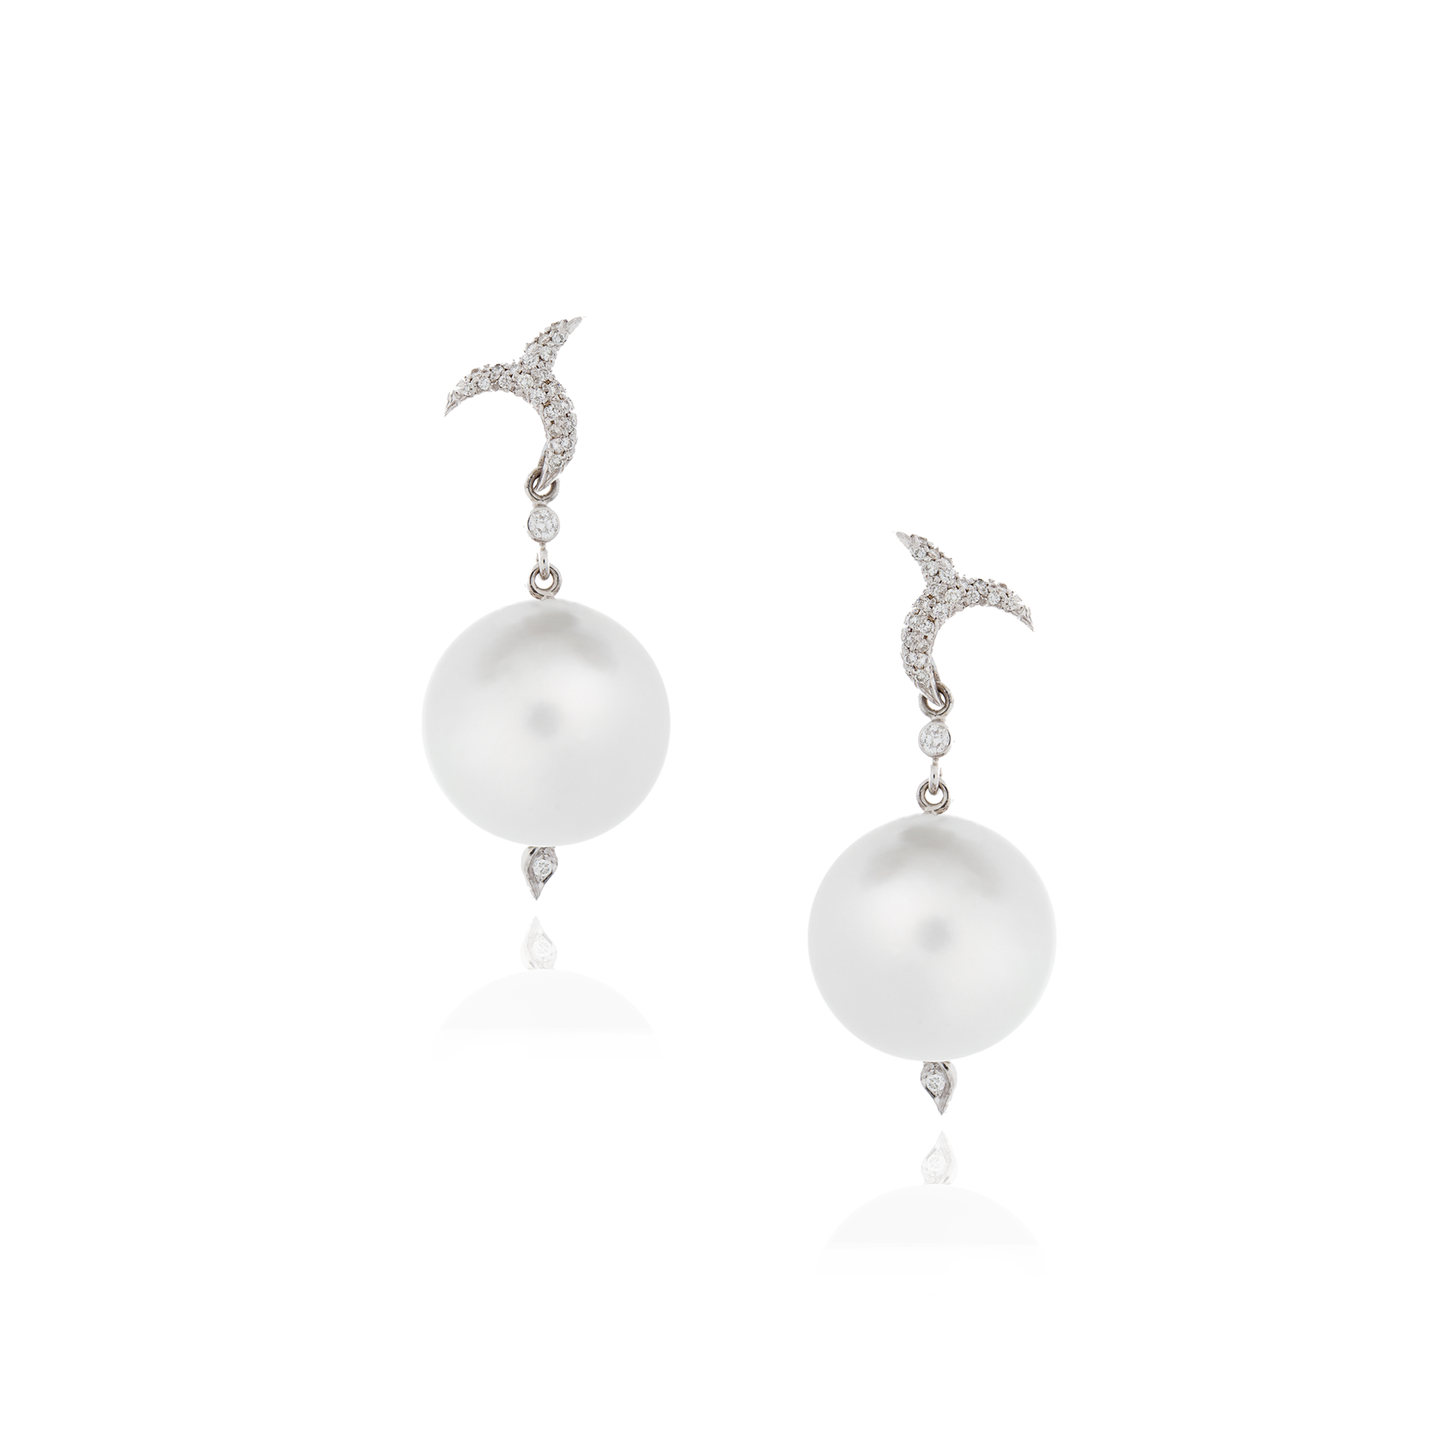 18K White Gold Earrings with Pearls